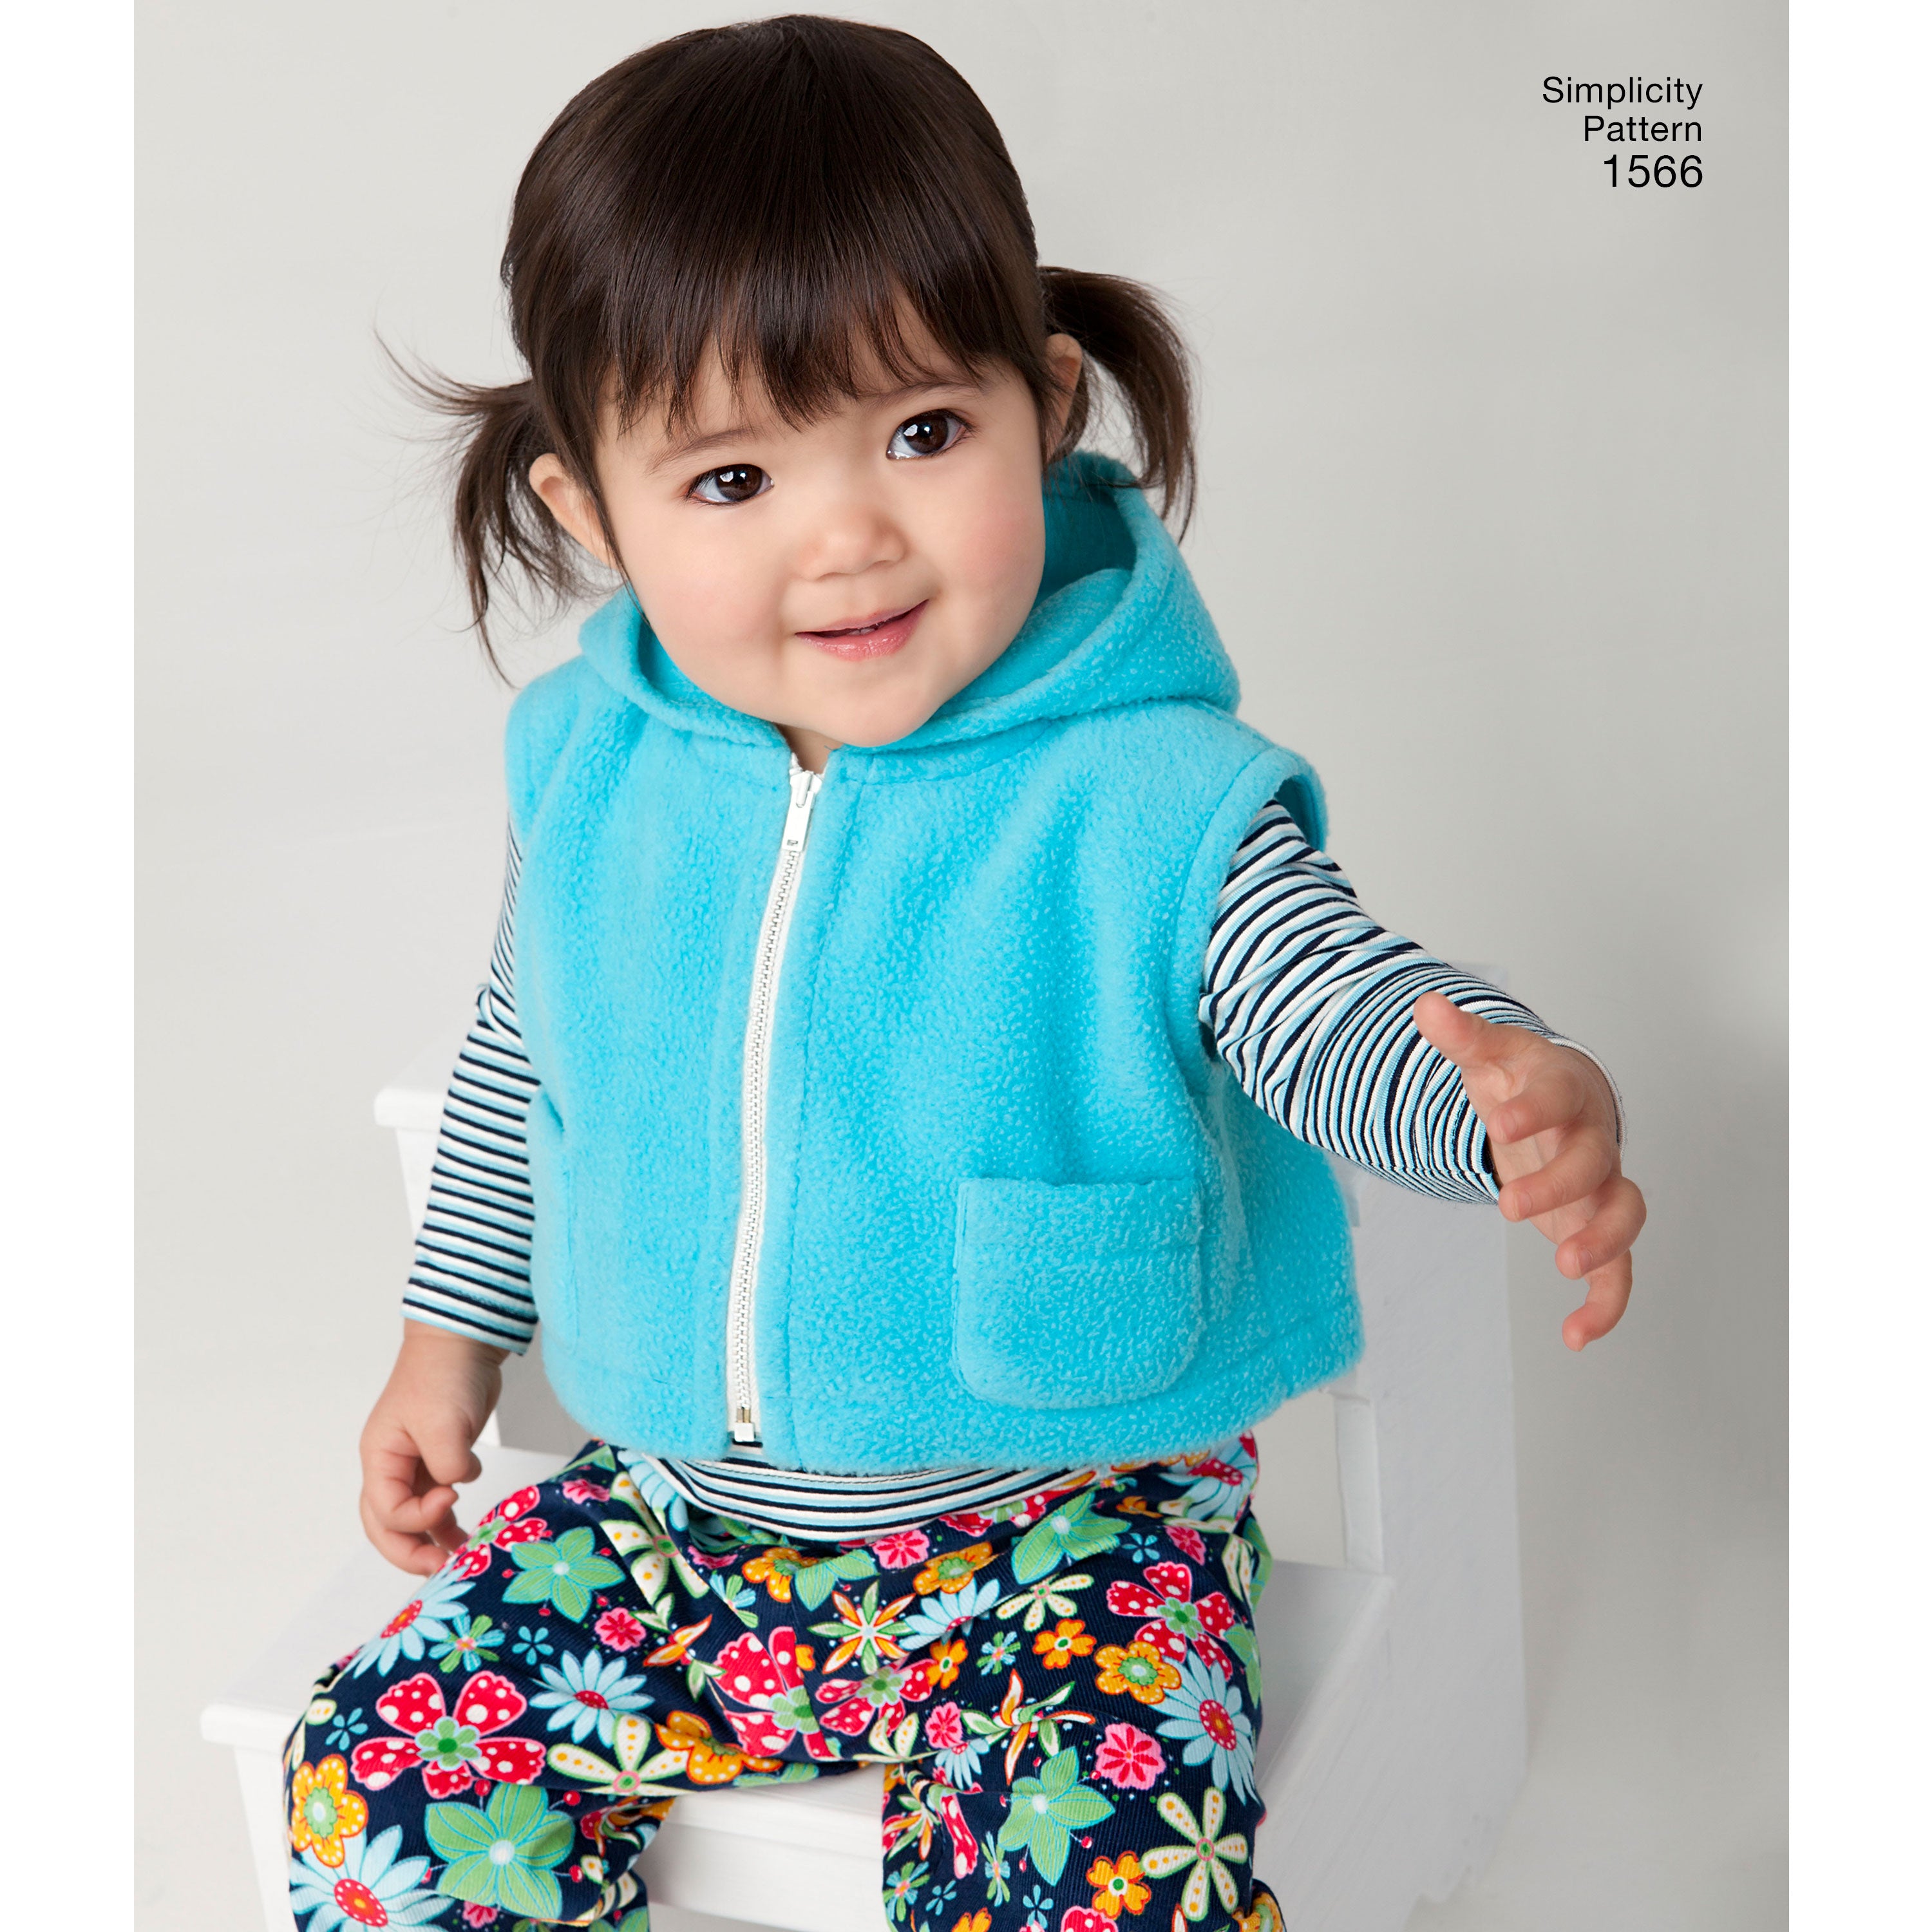 Simplicity Baby's Outfits S1566